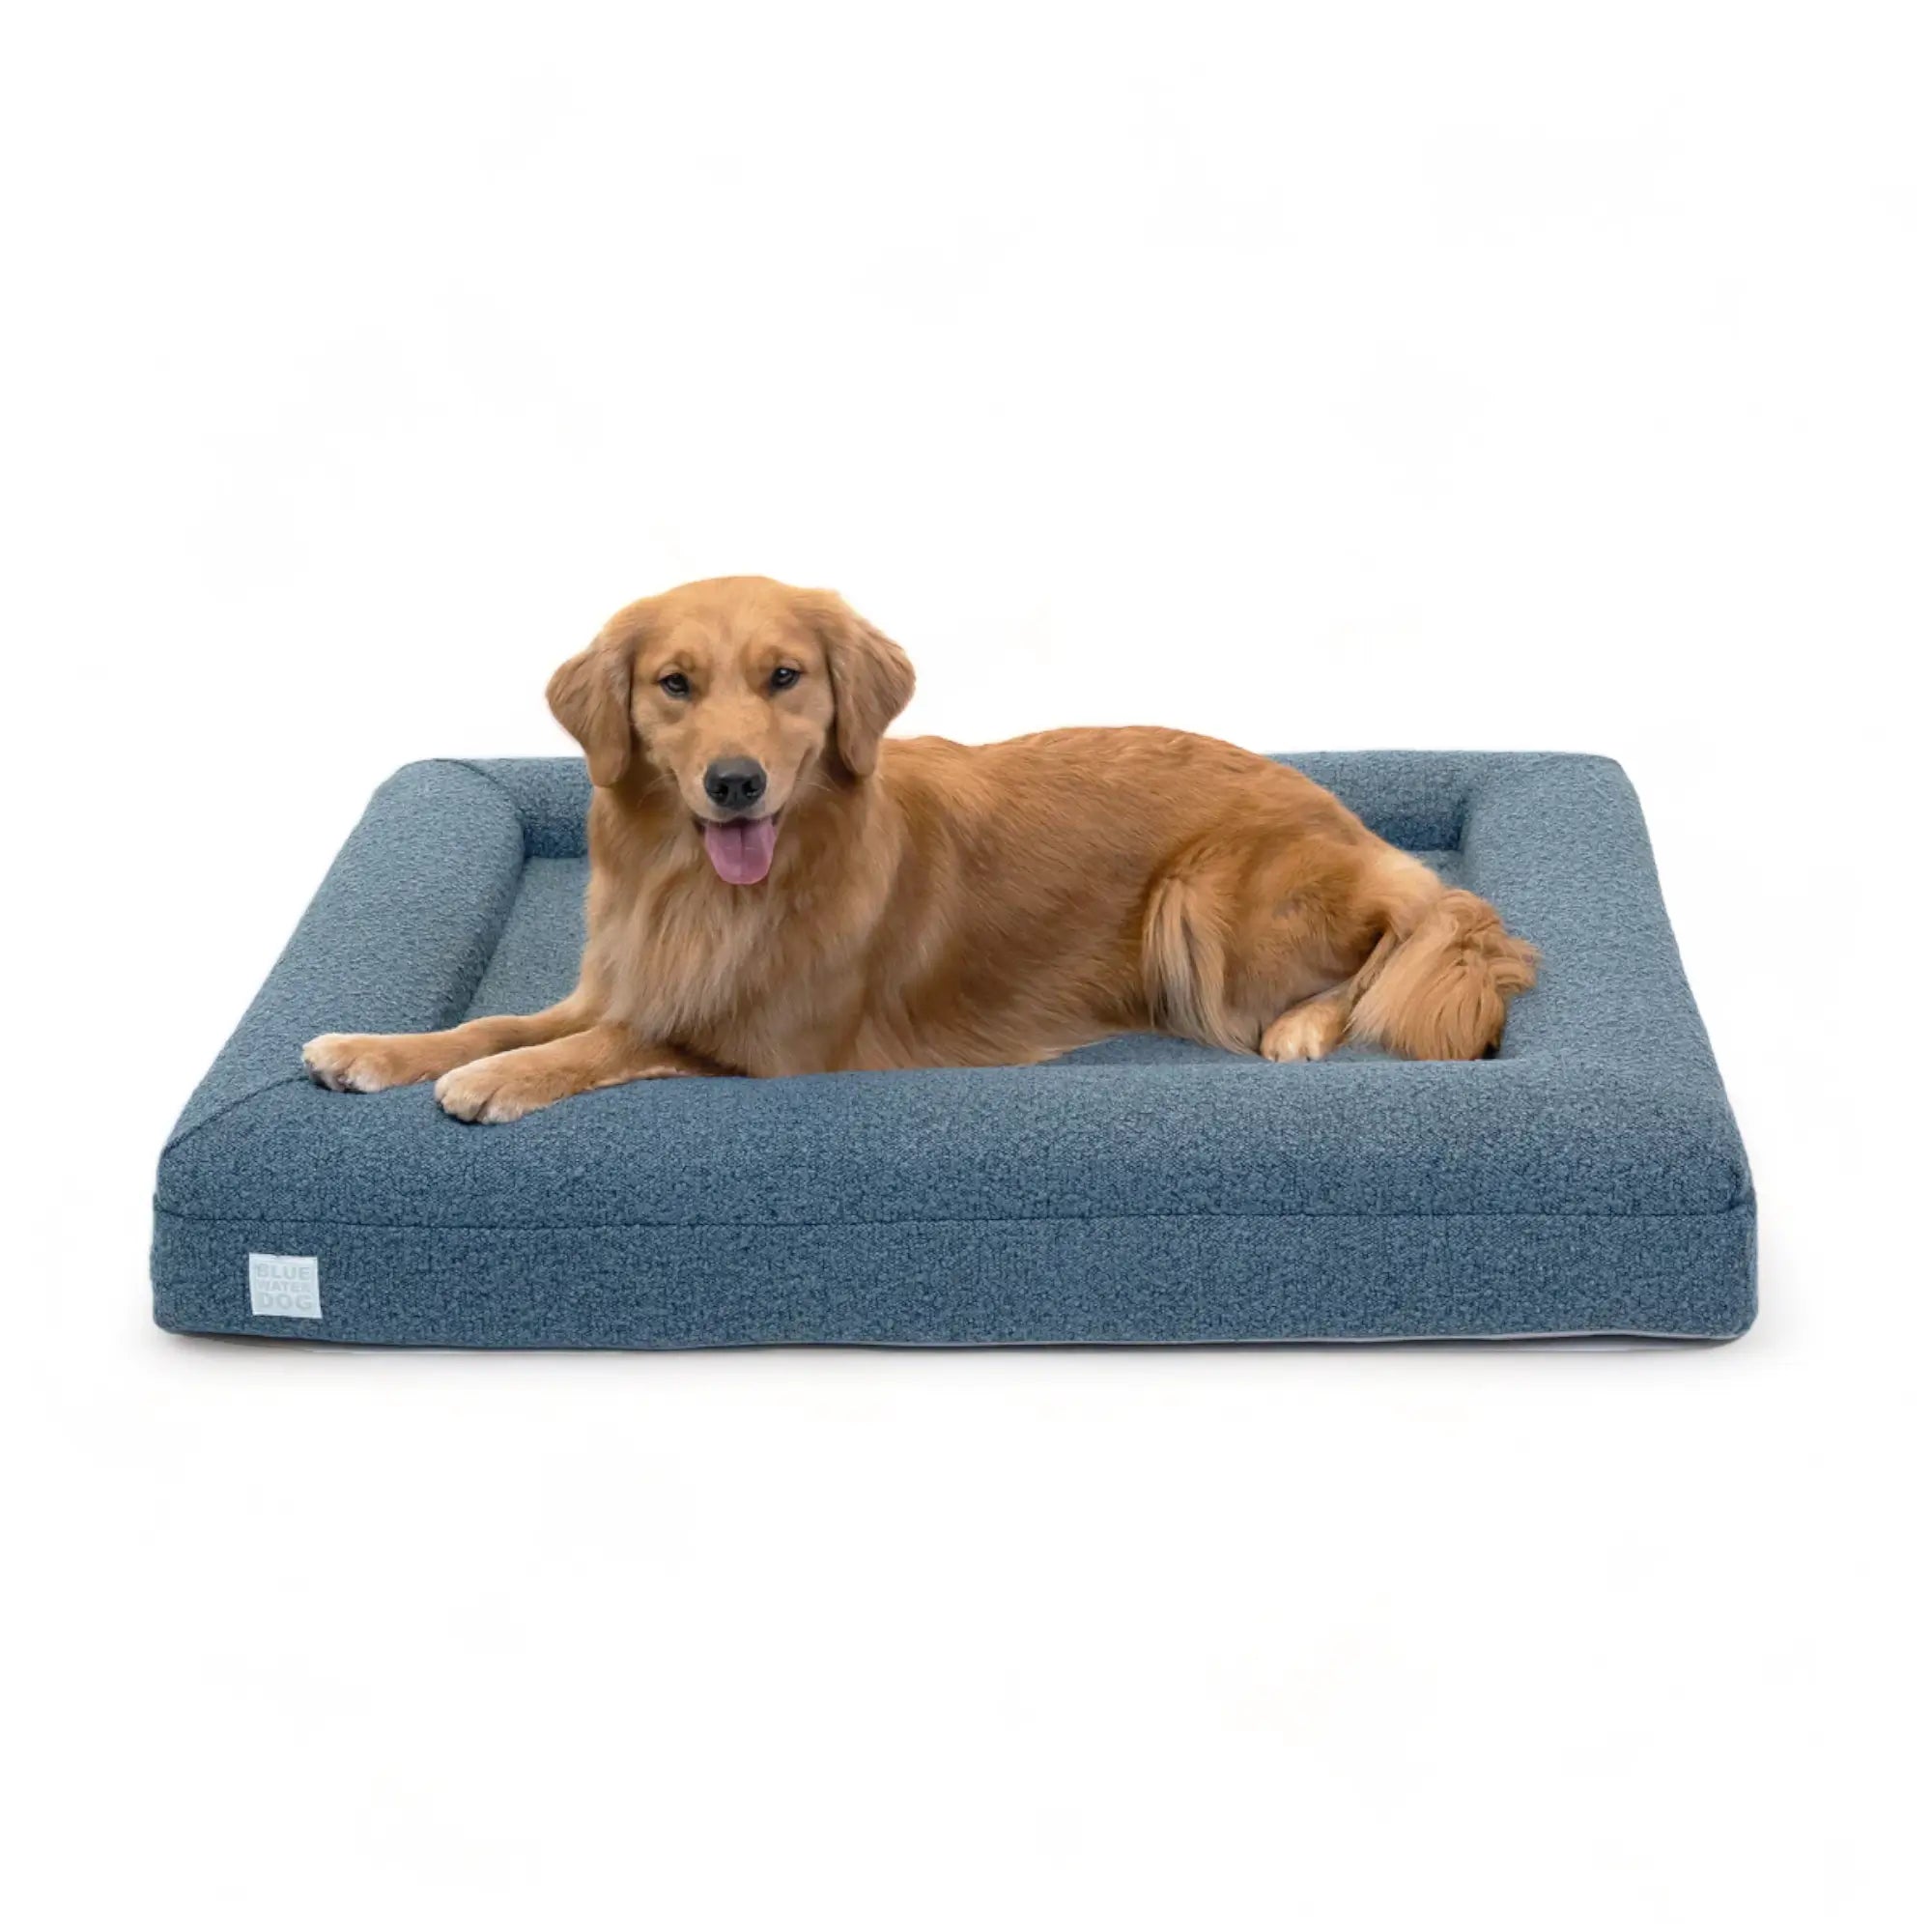 Golden Retriever laying on a large, blue-colored orthopedic memory foam boucle dog bed.